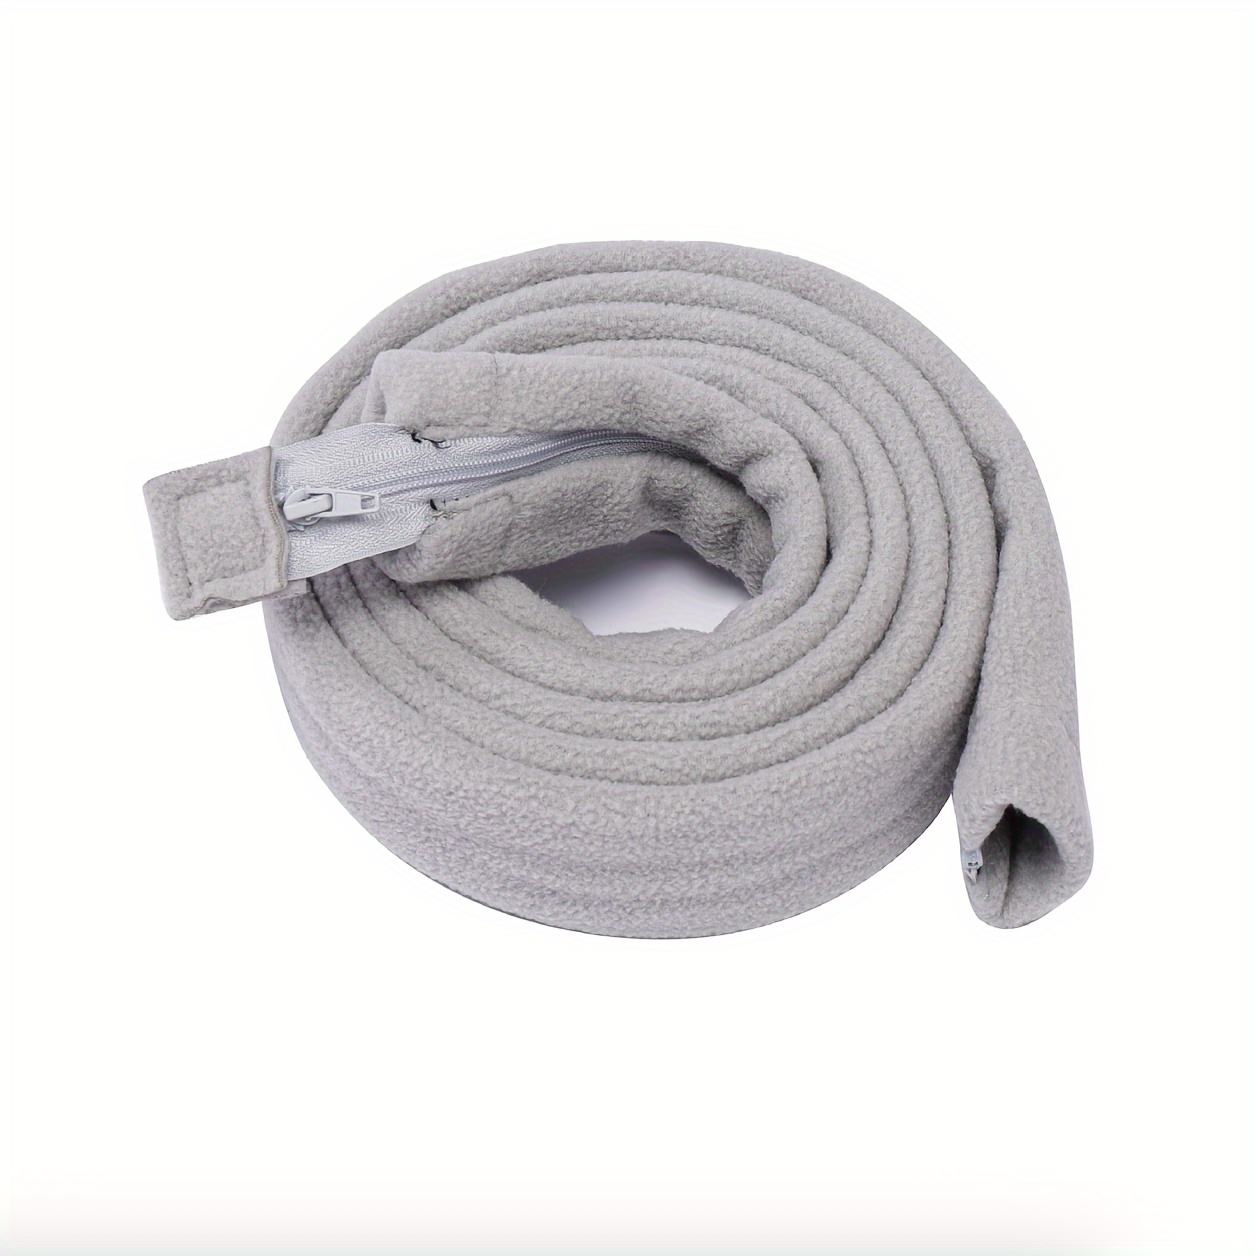 CPAP Hose Cover with Zipper for Standard 6 Foot CPAP Tubing Reusable  Comfort Fleece Tube Insulator Super Soft Washable Breathable Cover